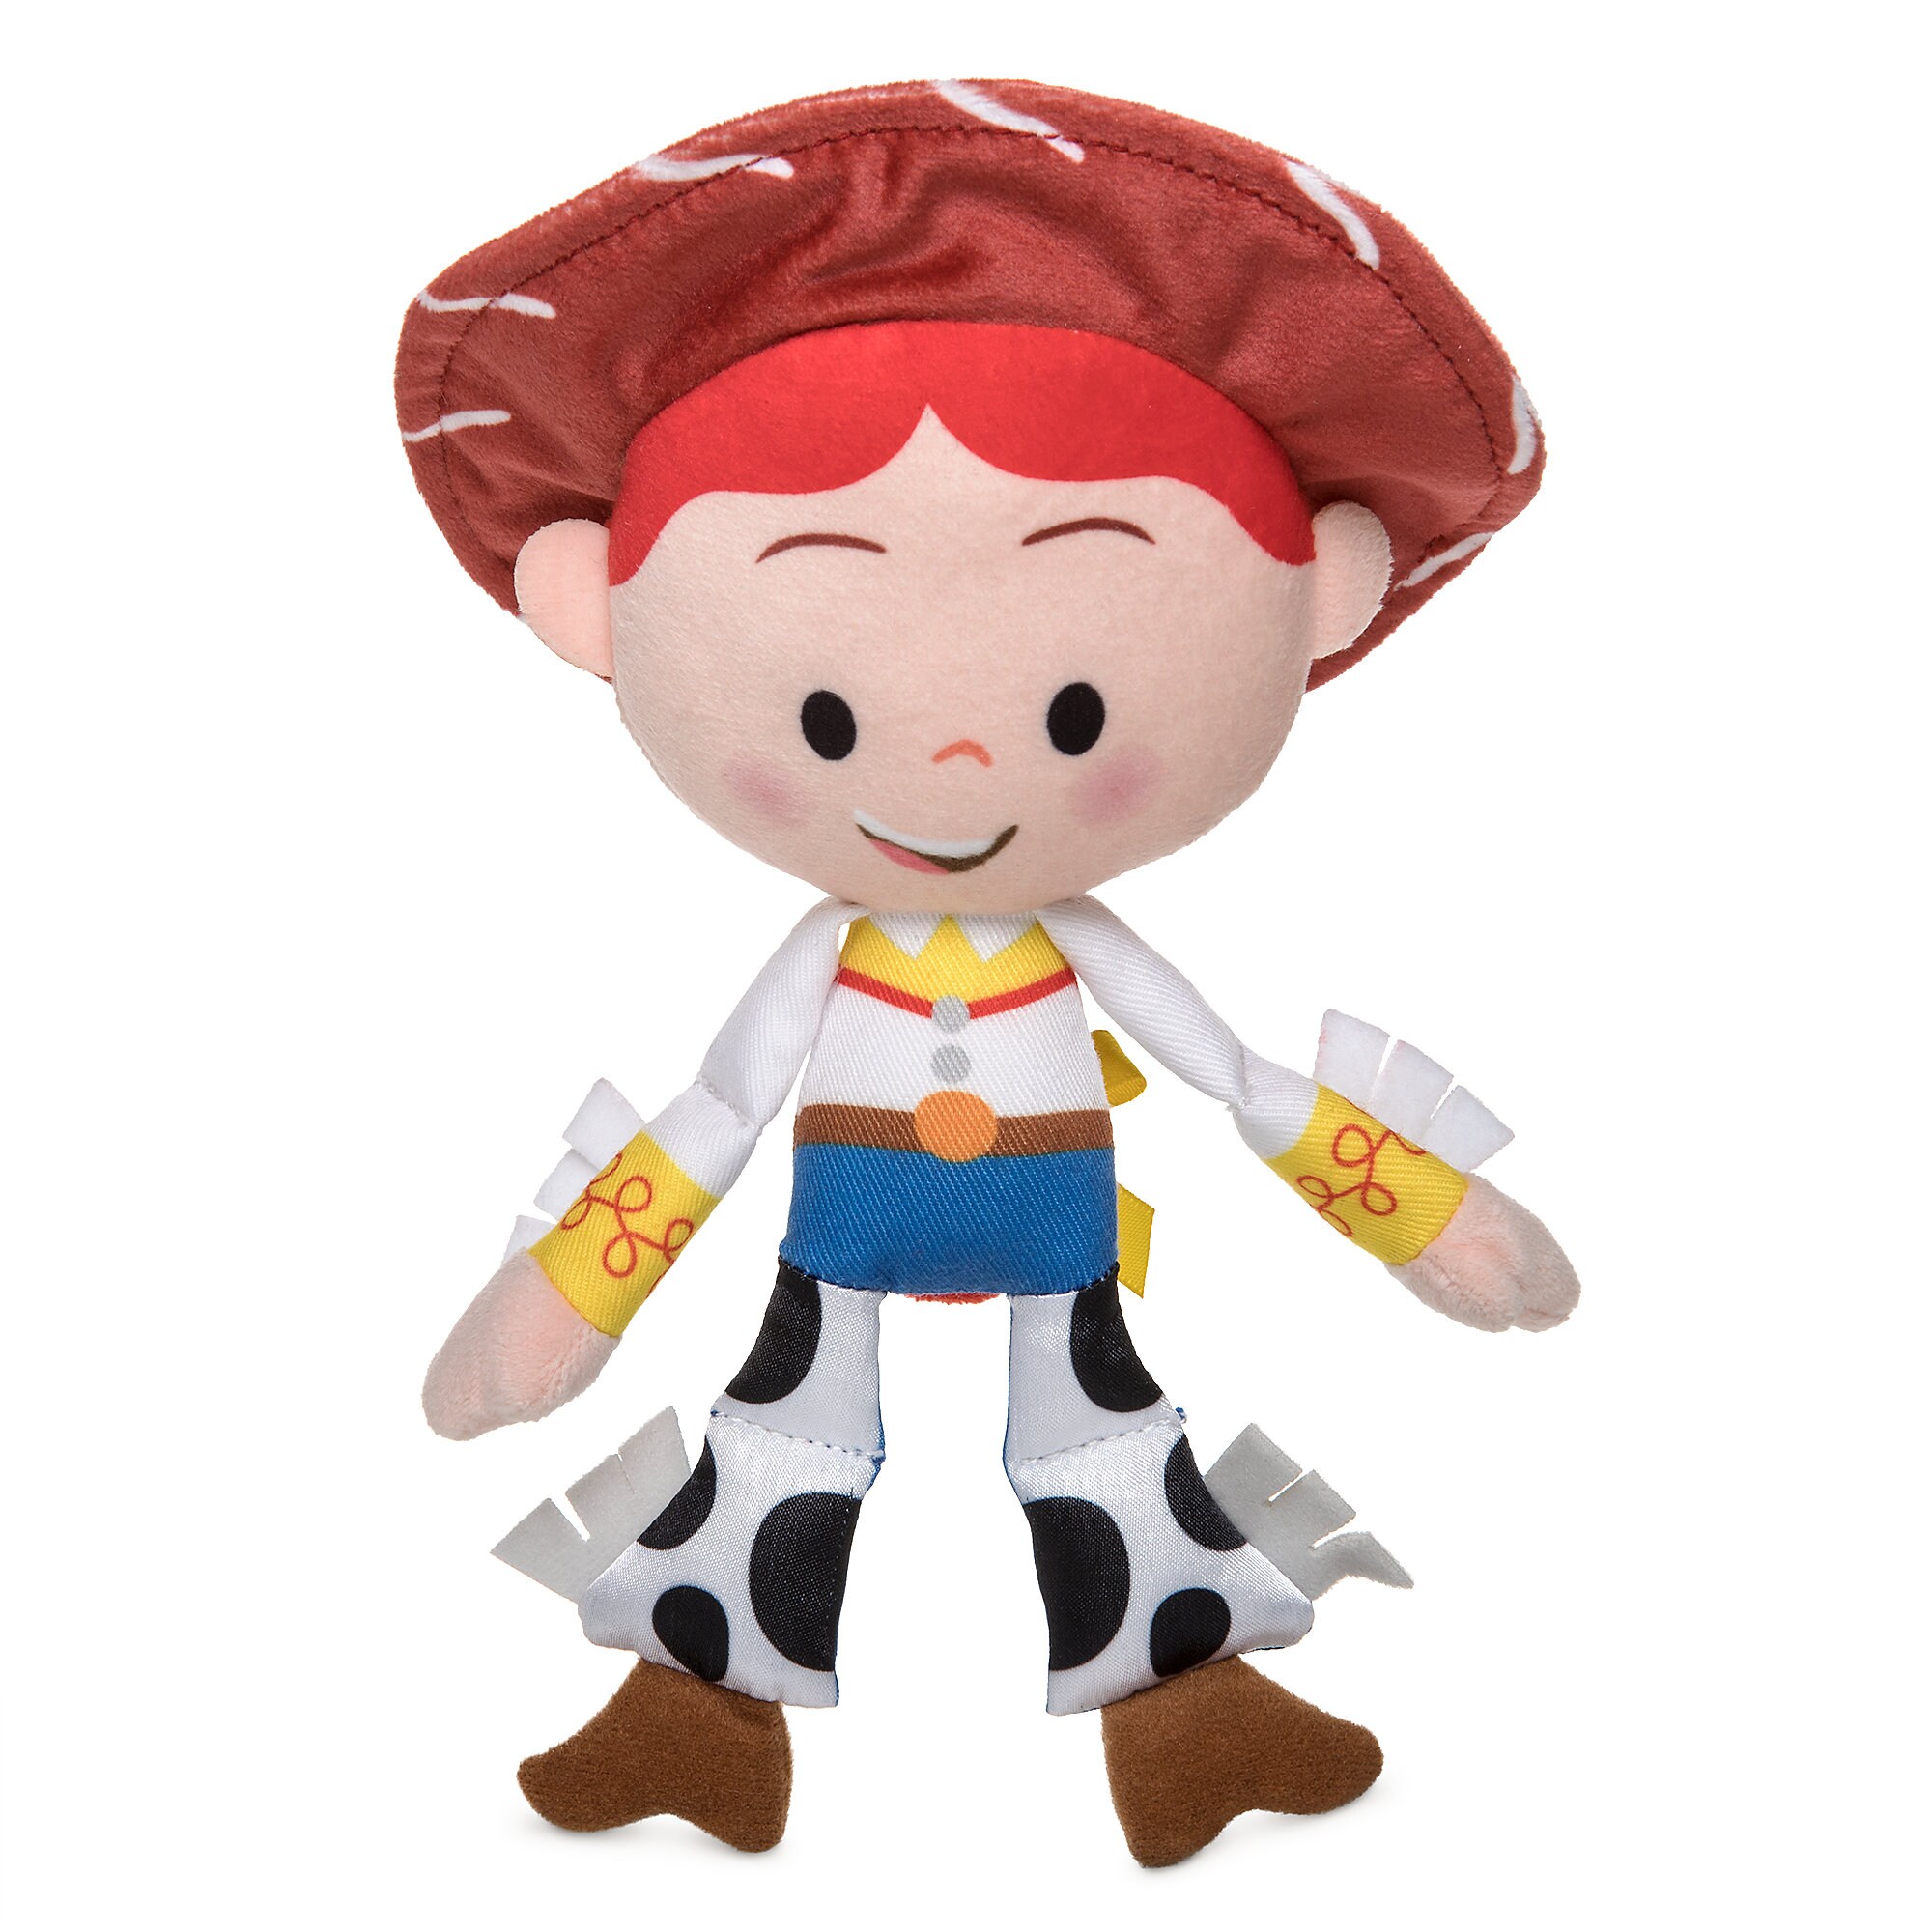 Jessie Plush Rattle for Baby - Toy Story